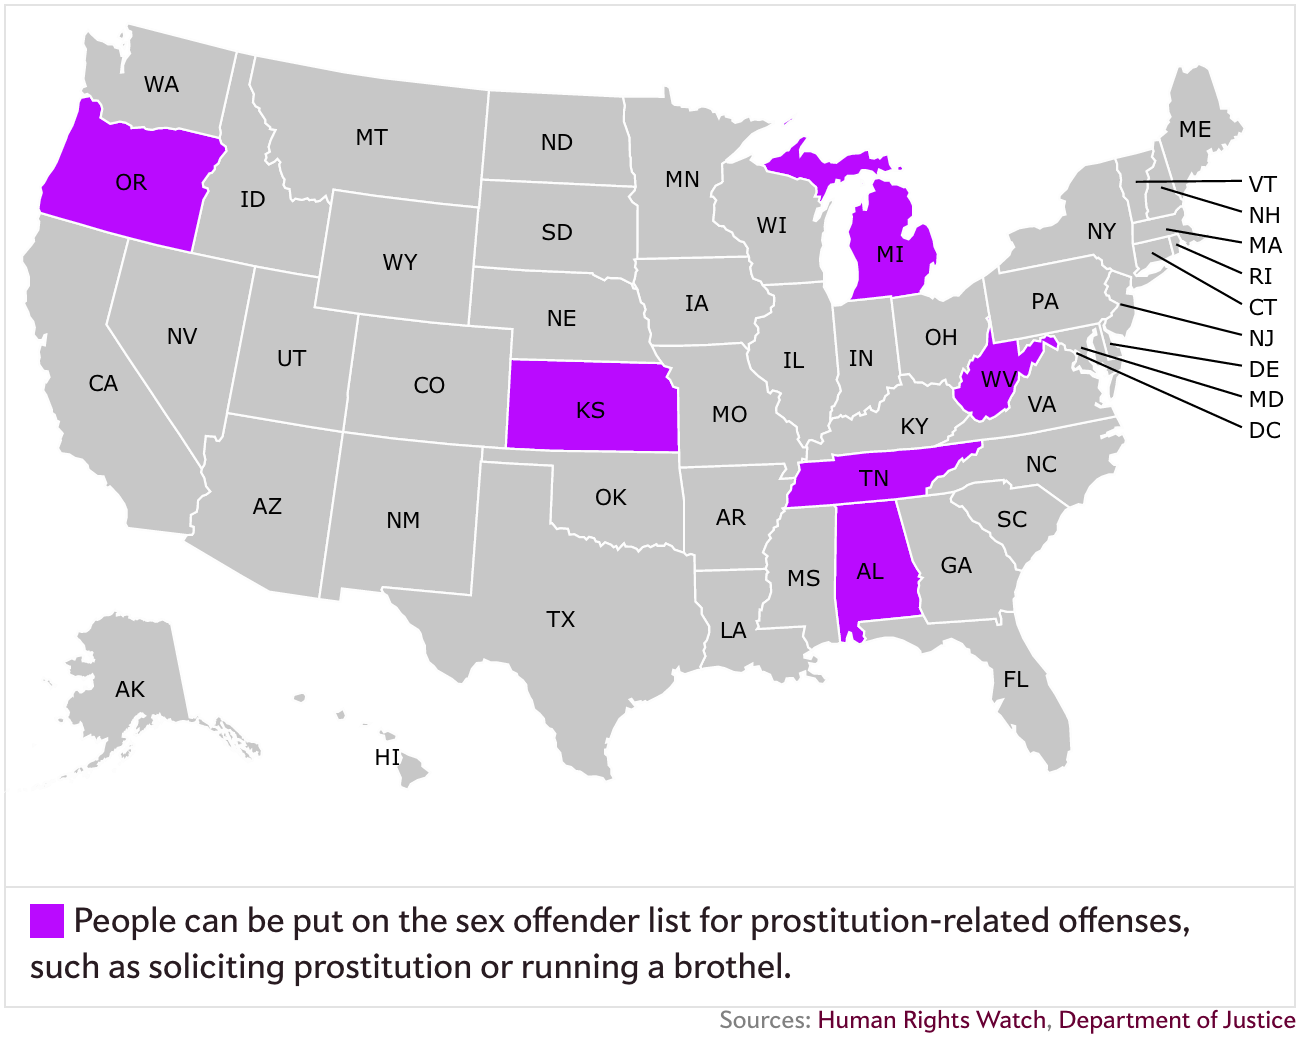 Mapped Sex offender registry laws on statutory rape, public urination, and prostitution.